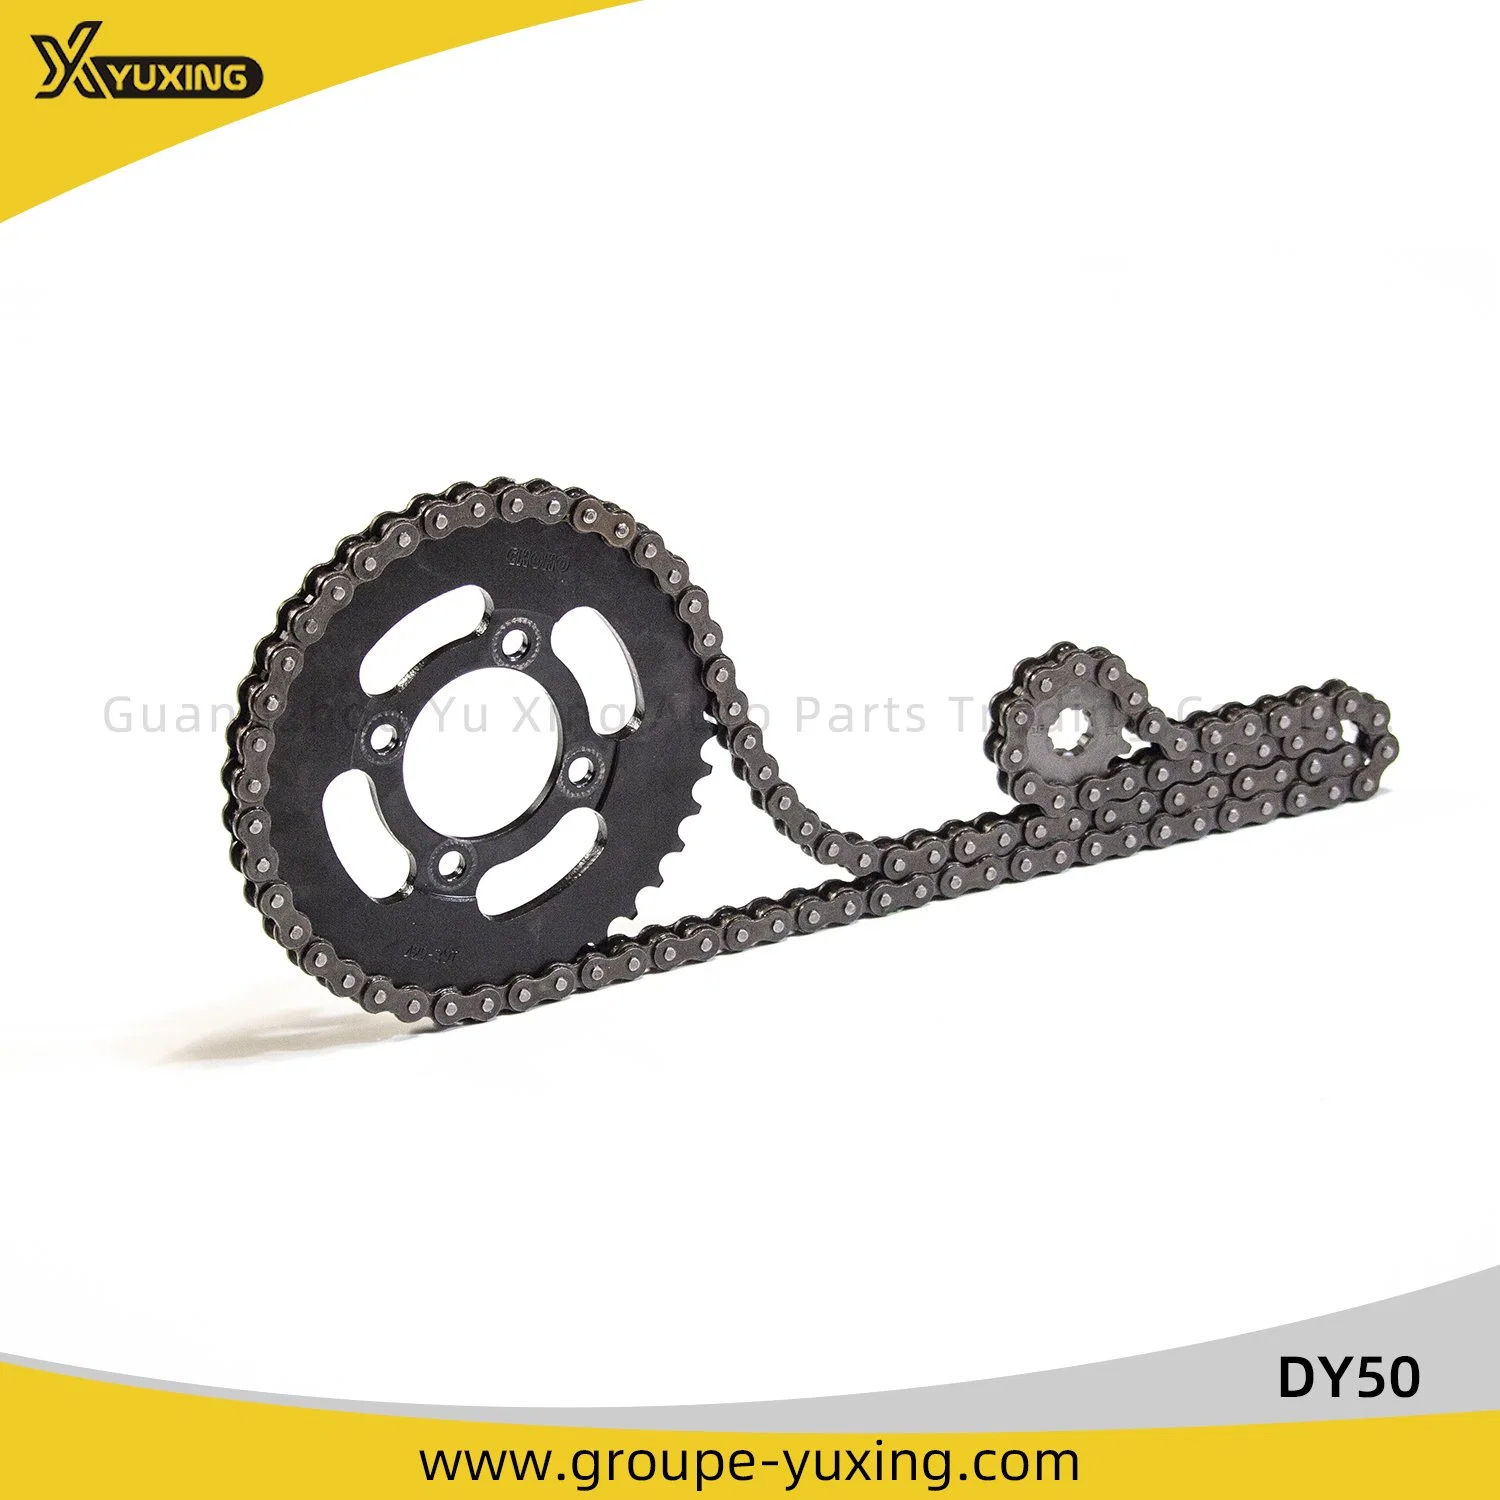 Factory Motorcycle Spare Part Sprocket and Chain Kit Motorcycle Parts for Dy50